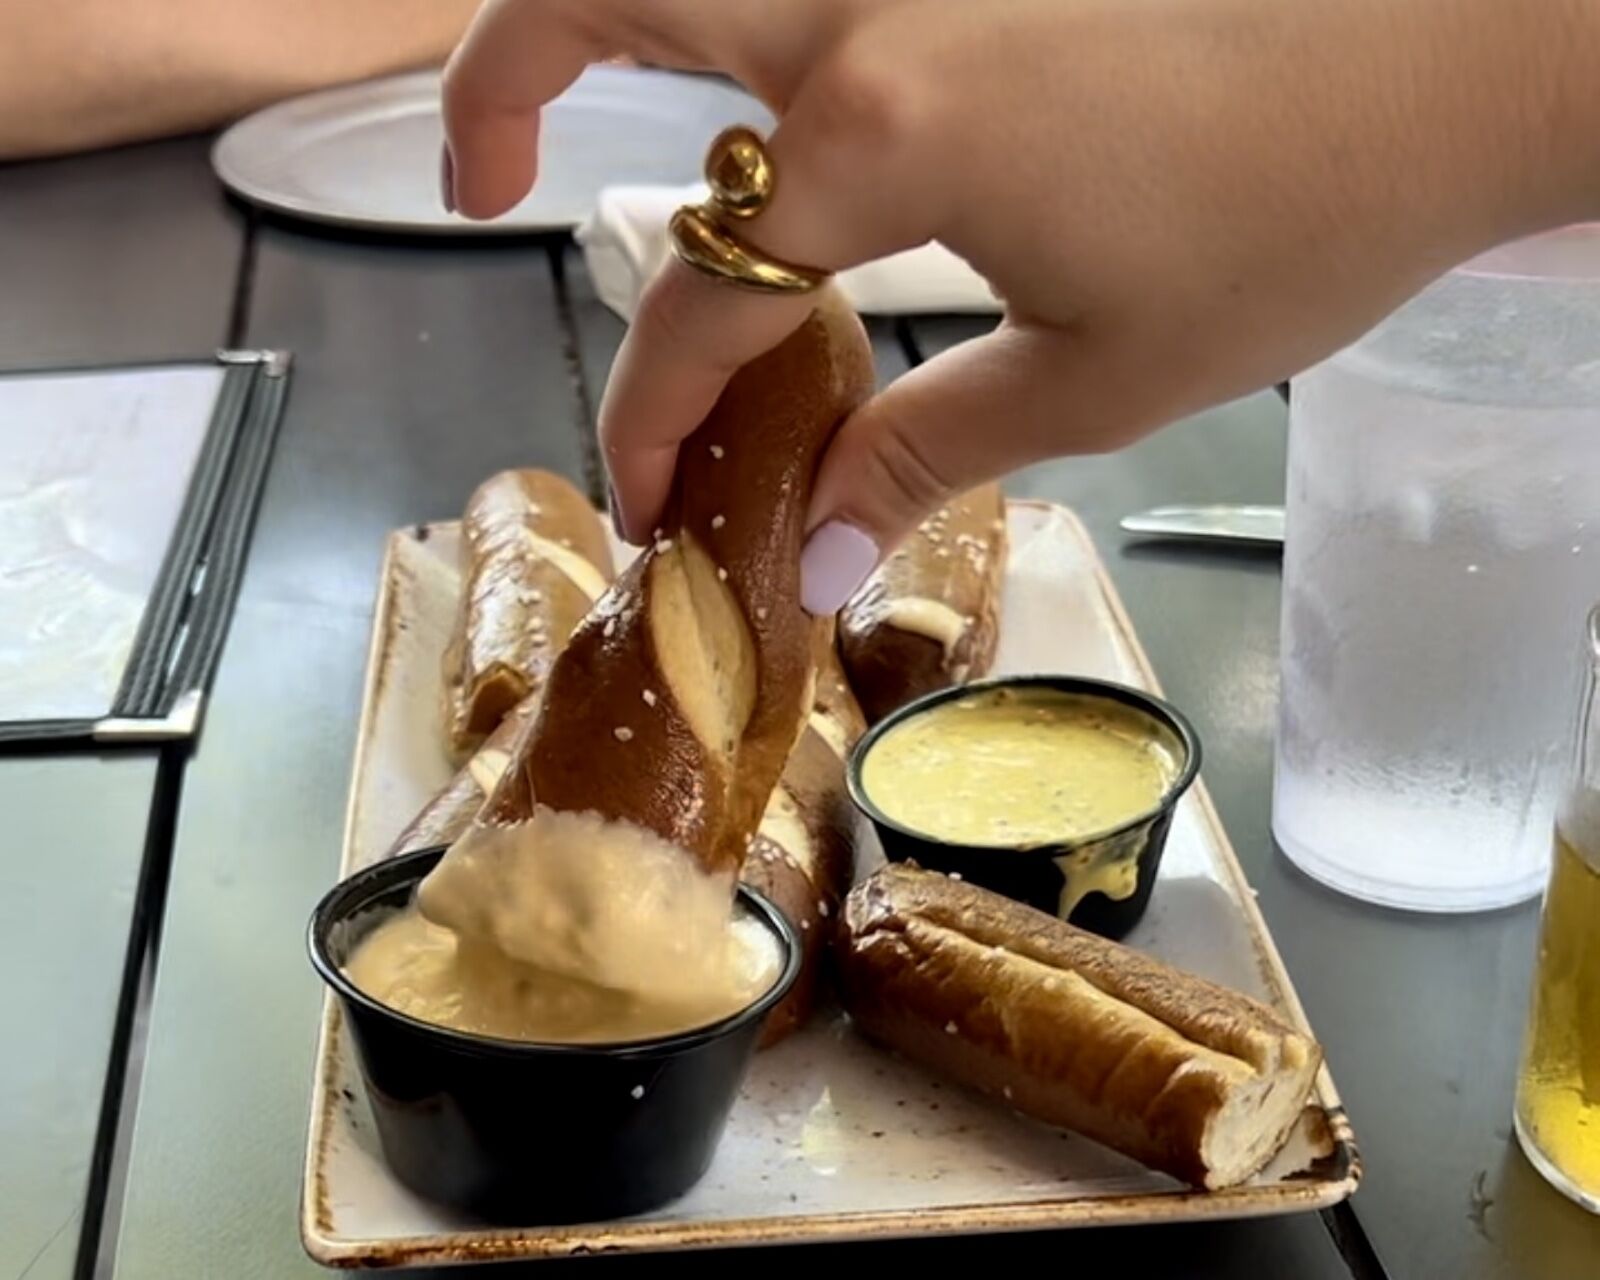 pretzel dipped in cheese